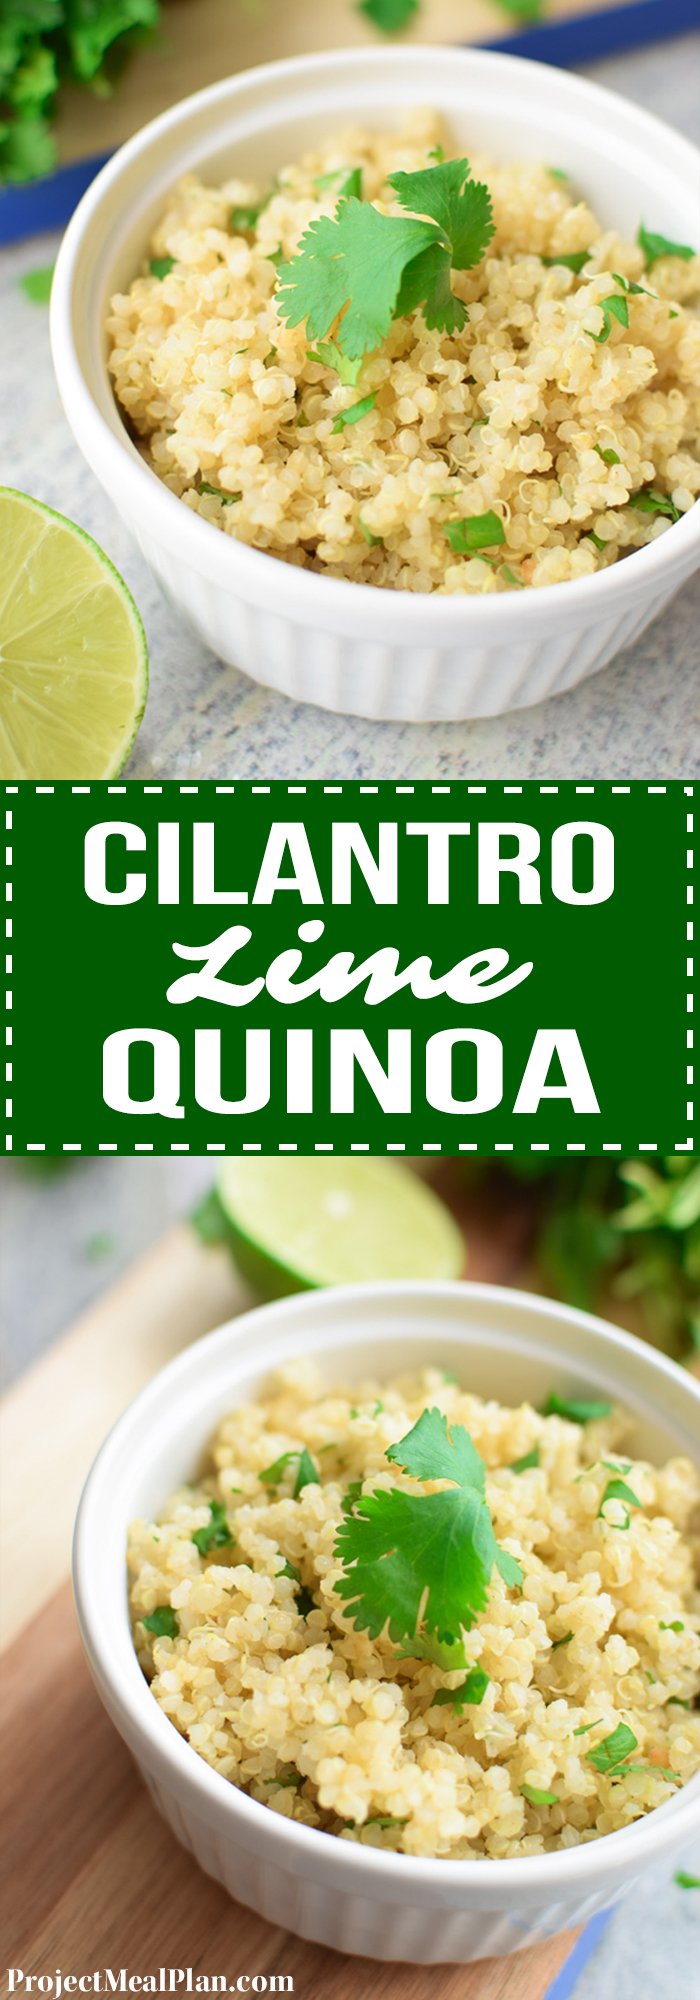 The Easiest Cilantro Lime Quinoa recipe - yummy and simple quinoa side dish made in a rice cooker! Perfect sub for rice in any dish. - ProjectMealPlan.com